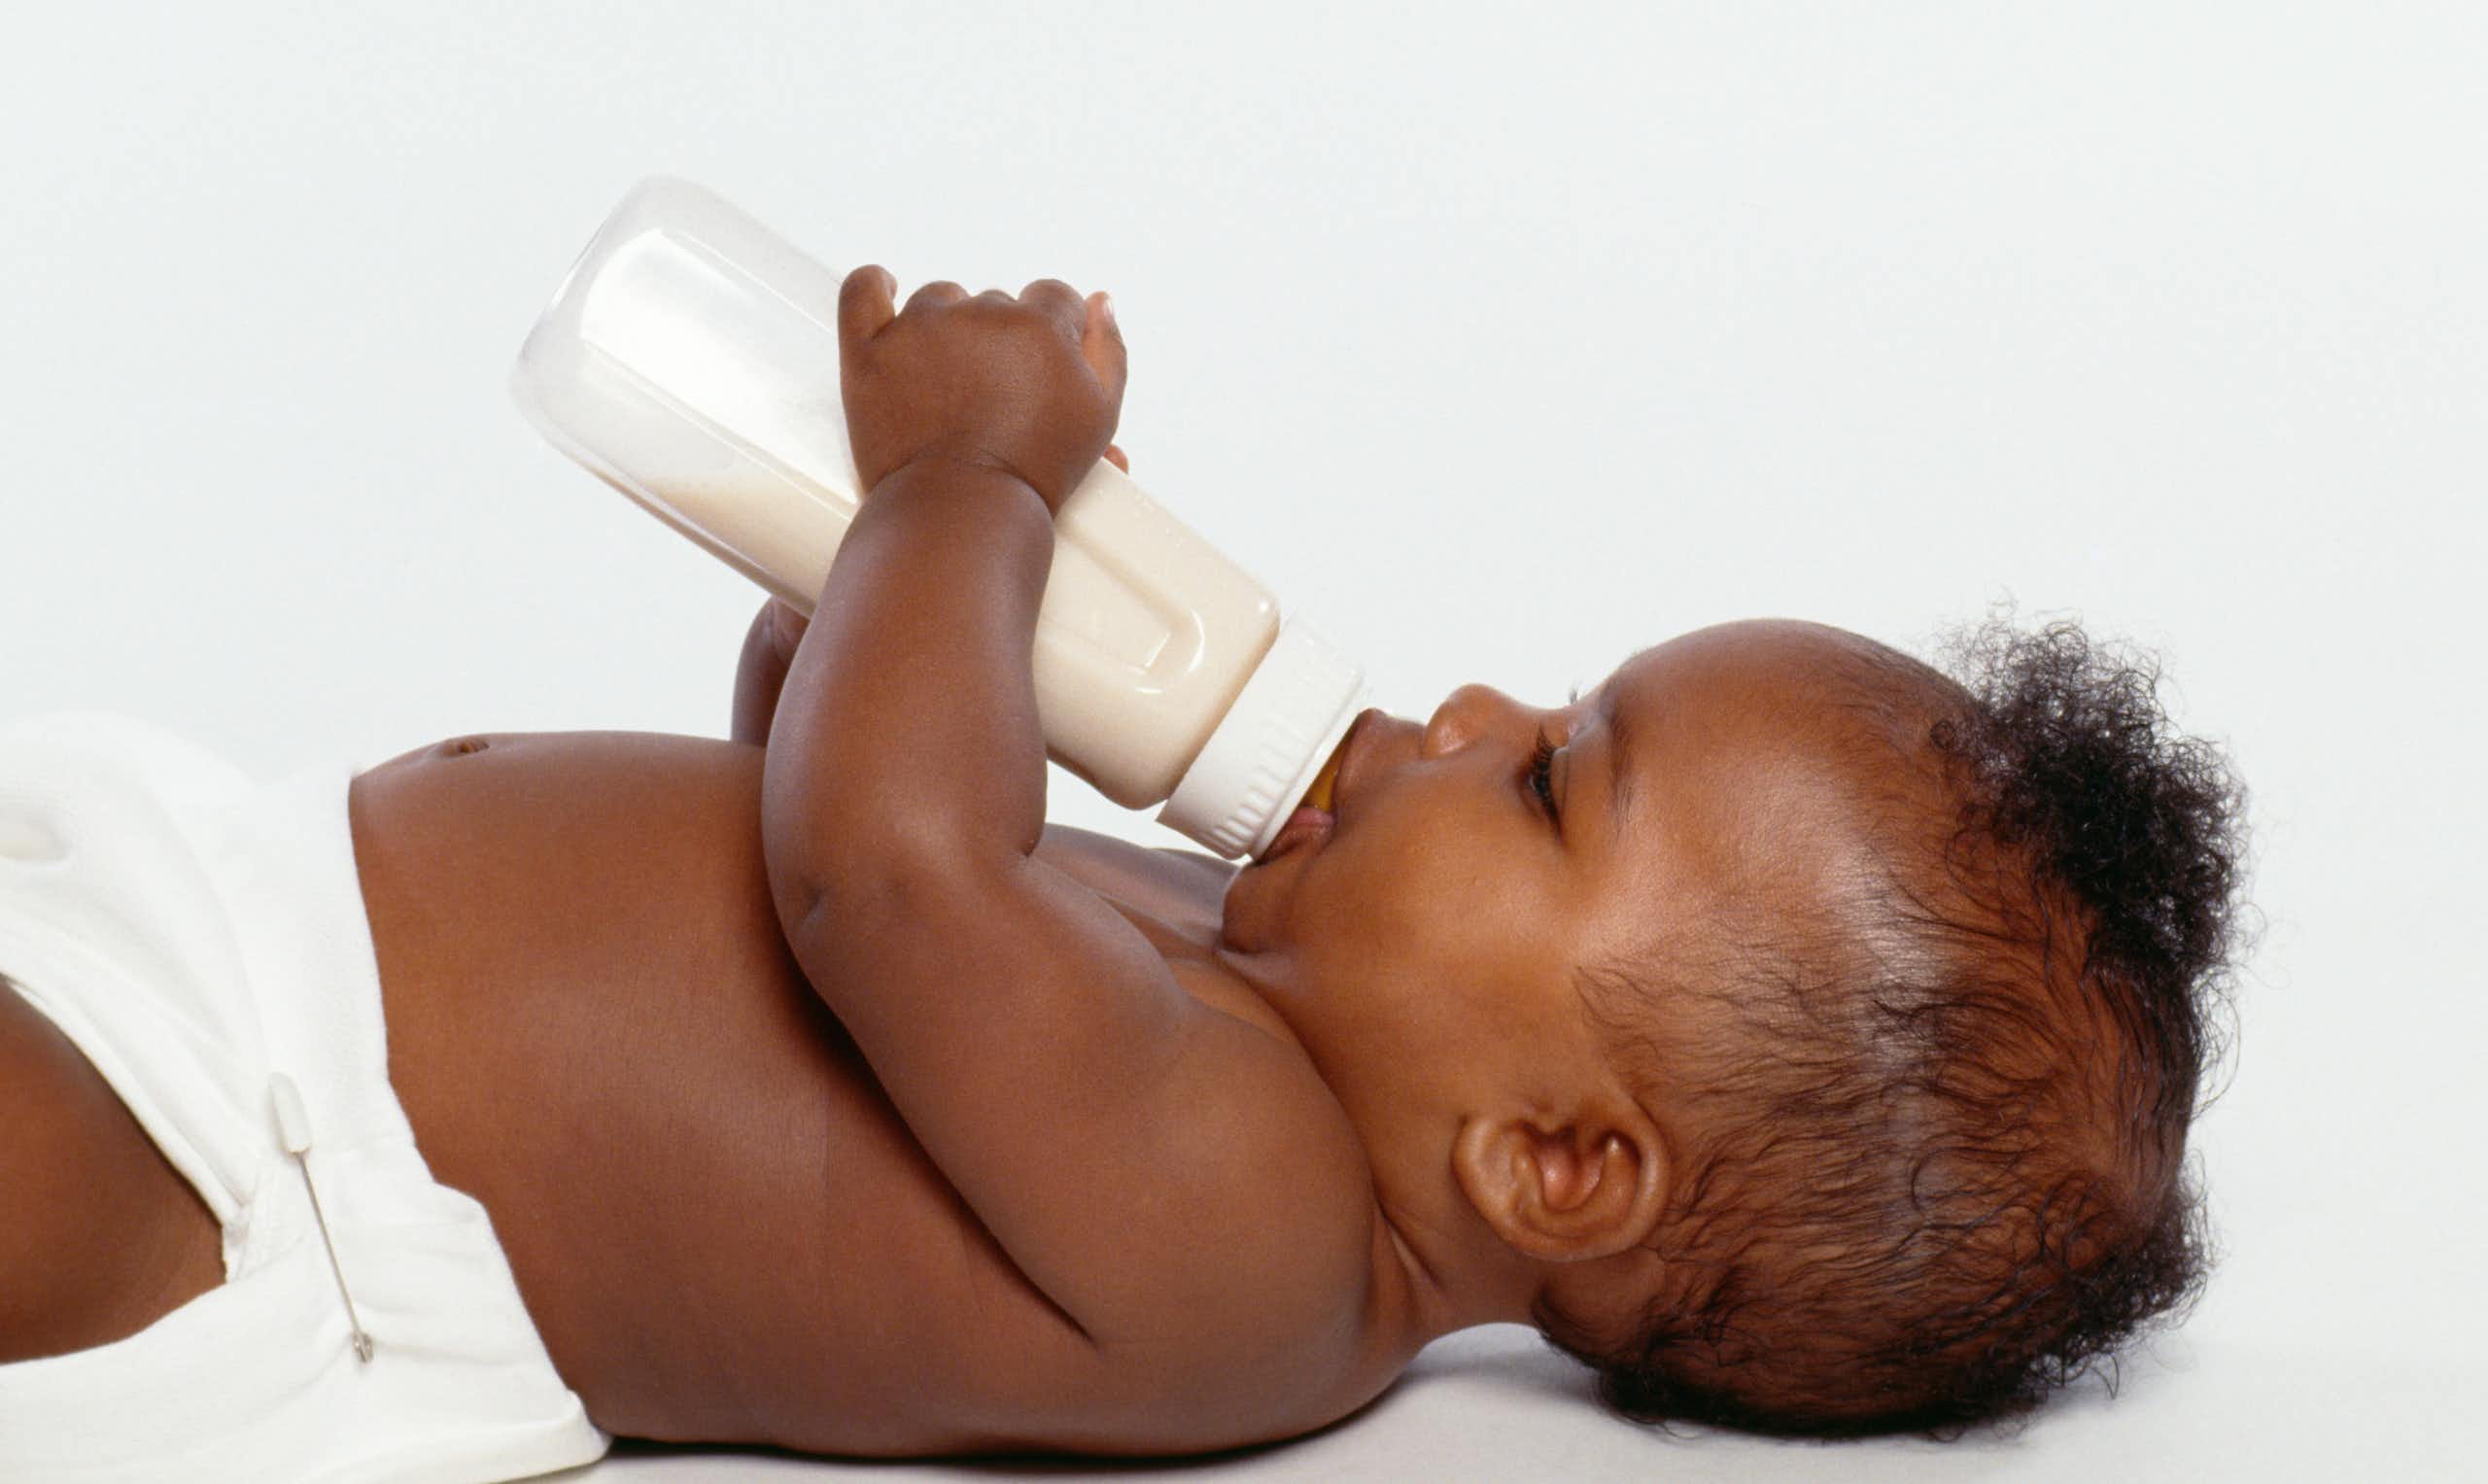 A baby lying on its back and drinking out of a bottle